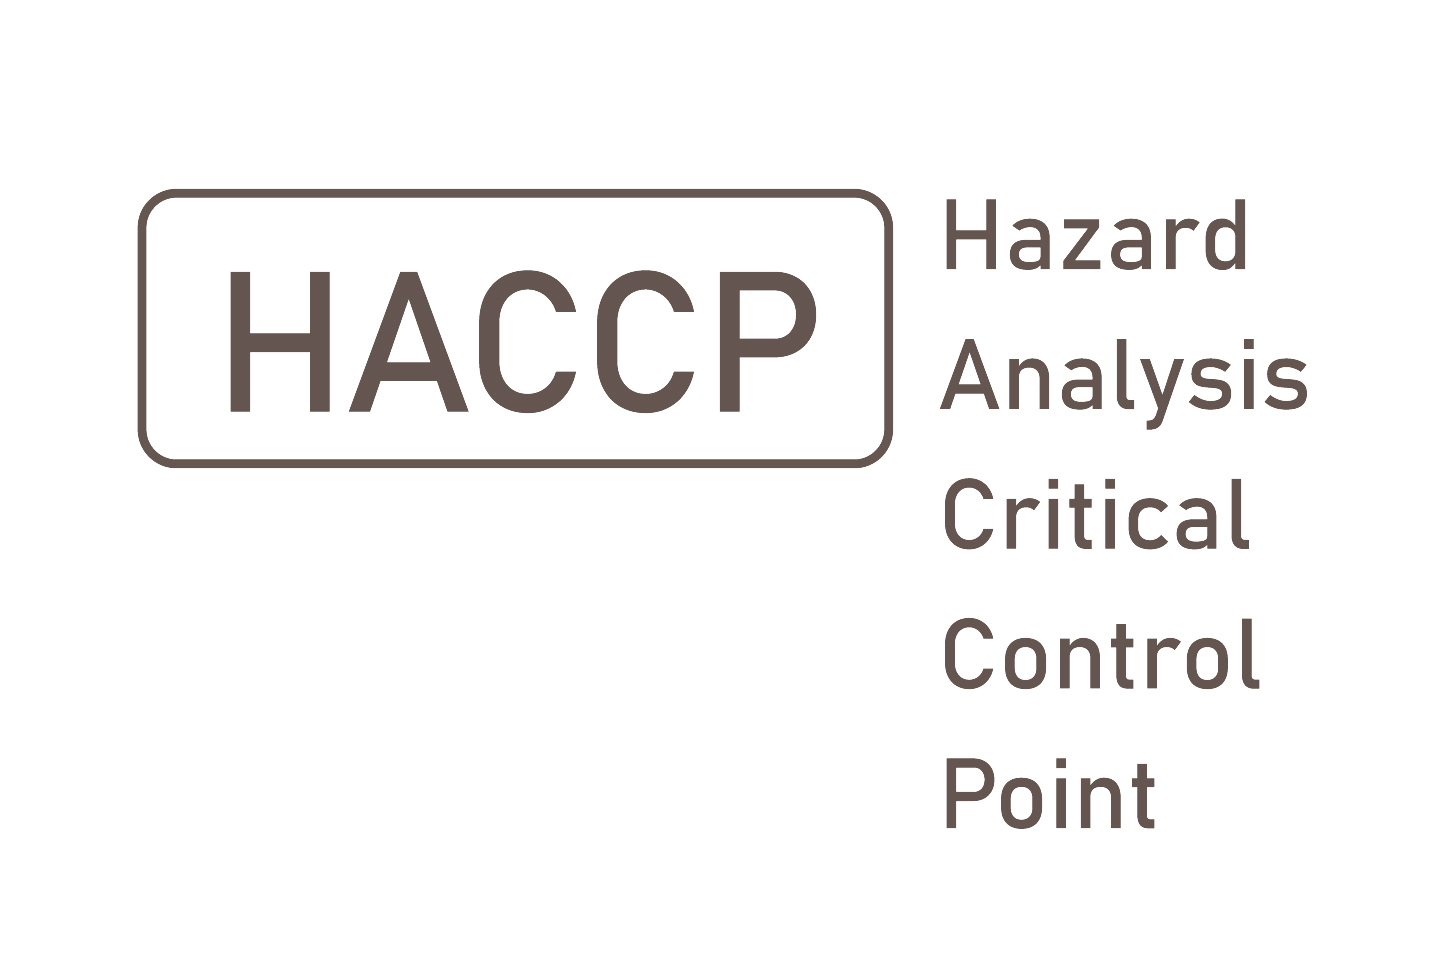 HACCP Hazard Analysis and Critical Control Point